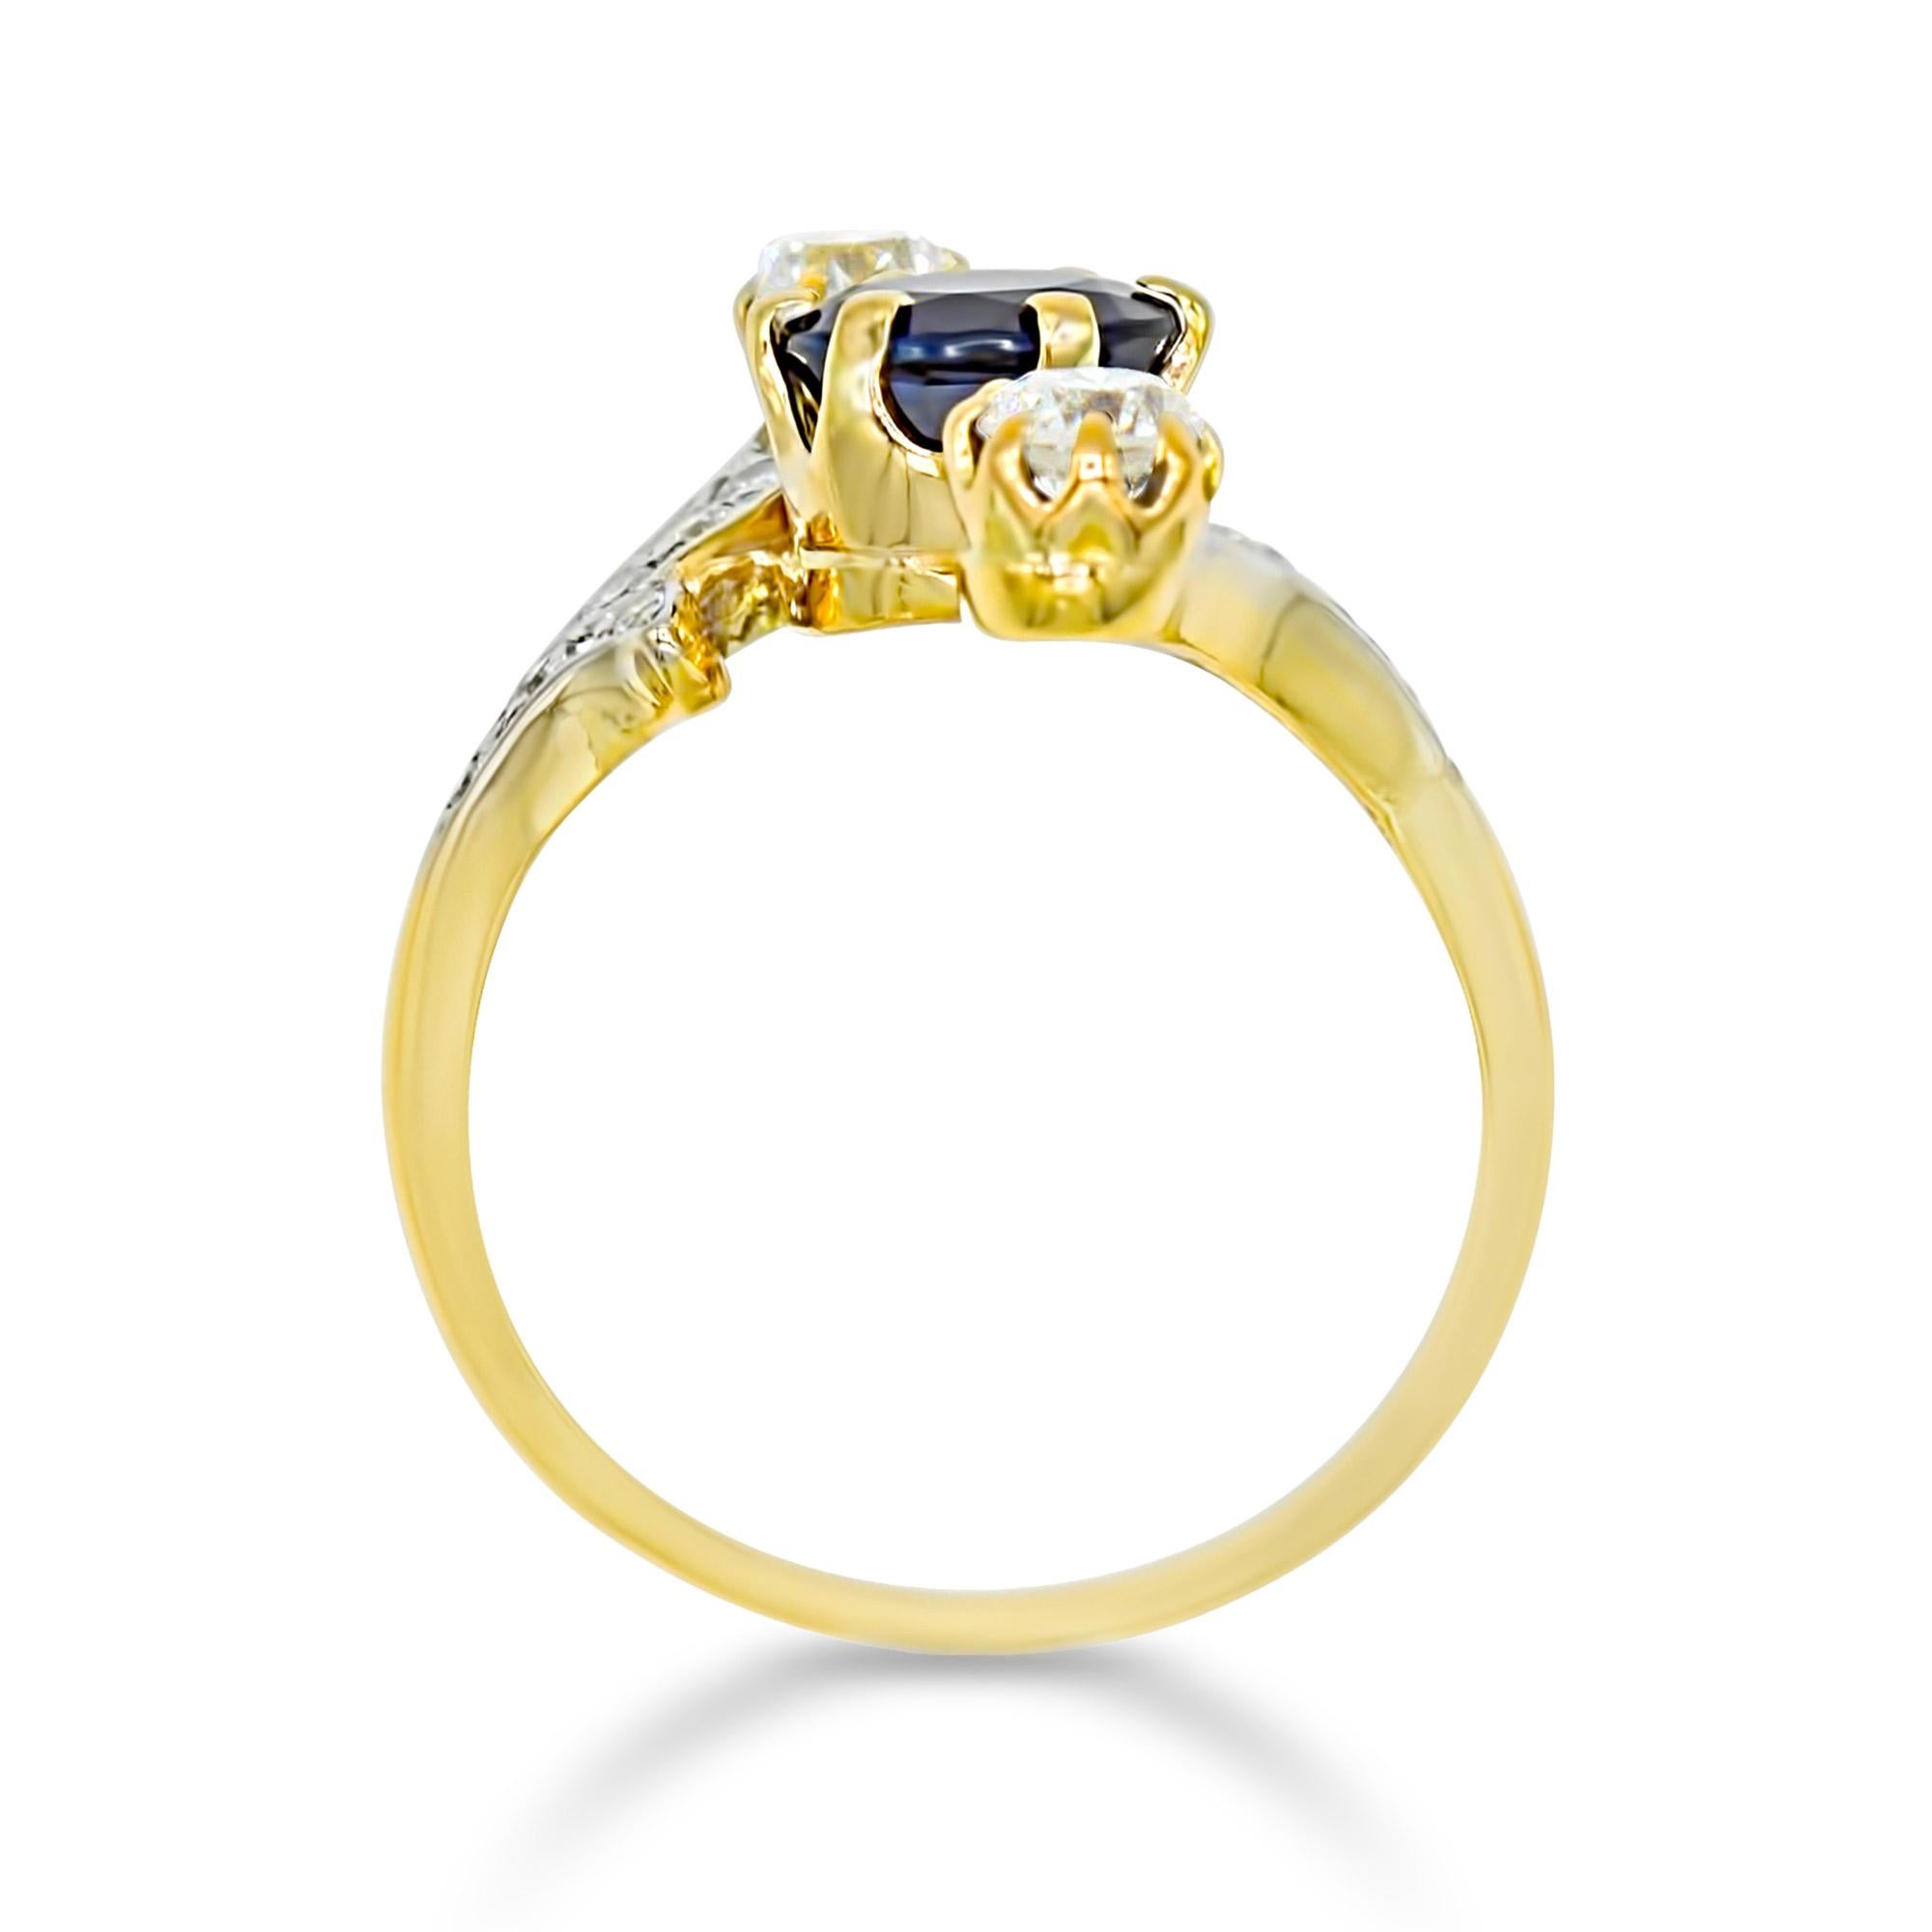 Belle Époque Belle Epoque 1.36 Ct. Natural Unheated Sapphire Ring in 18k Yellow Gold For Sale